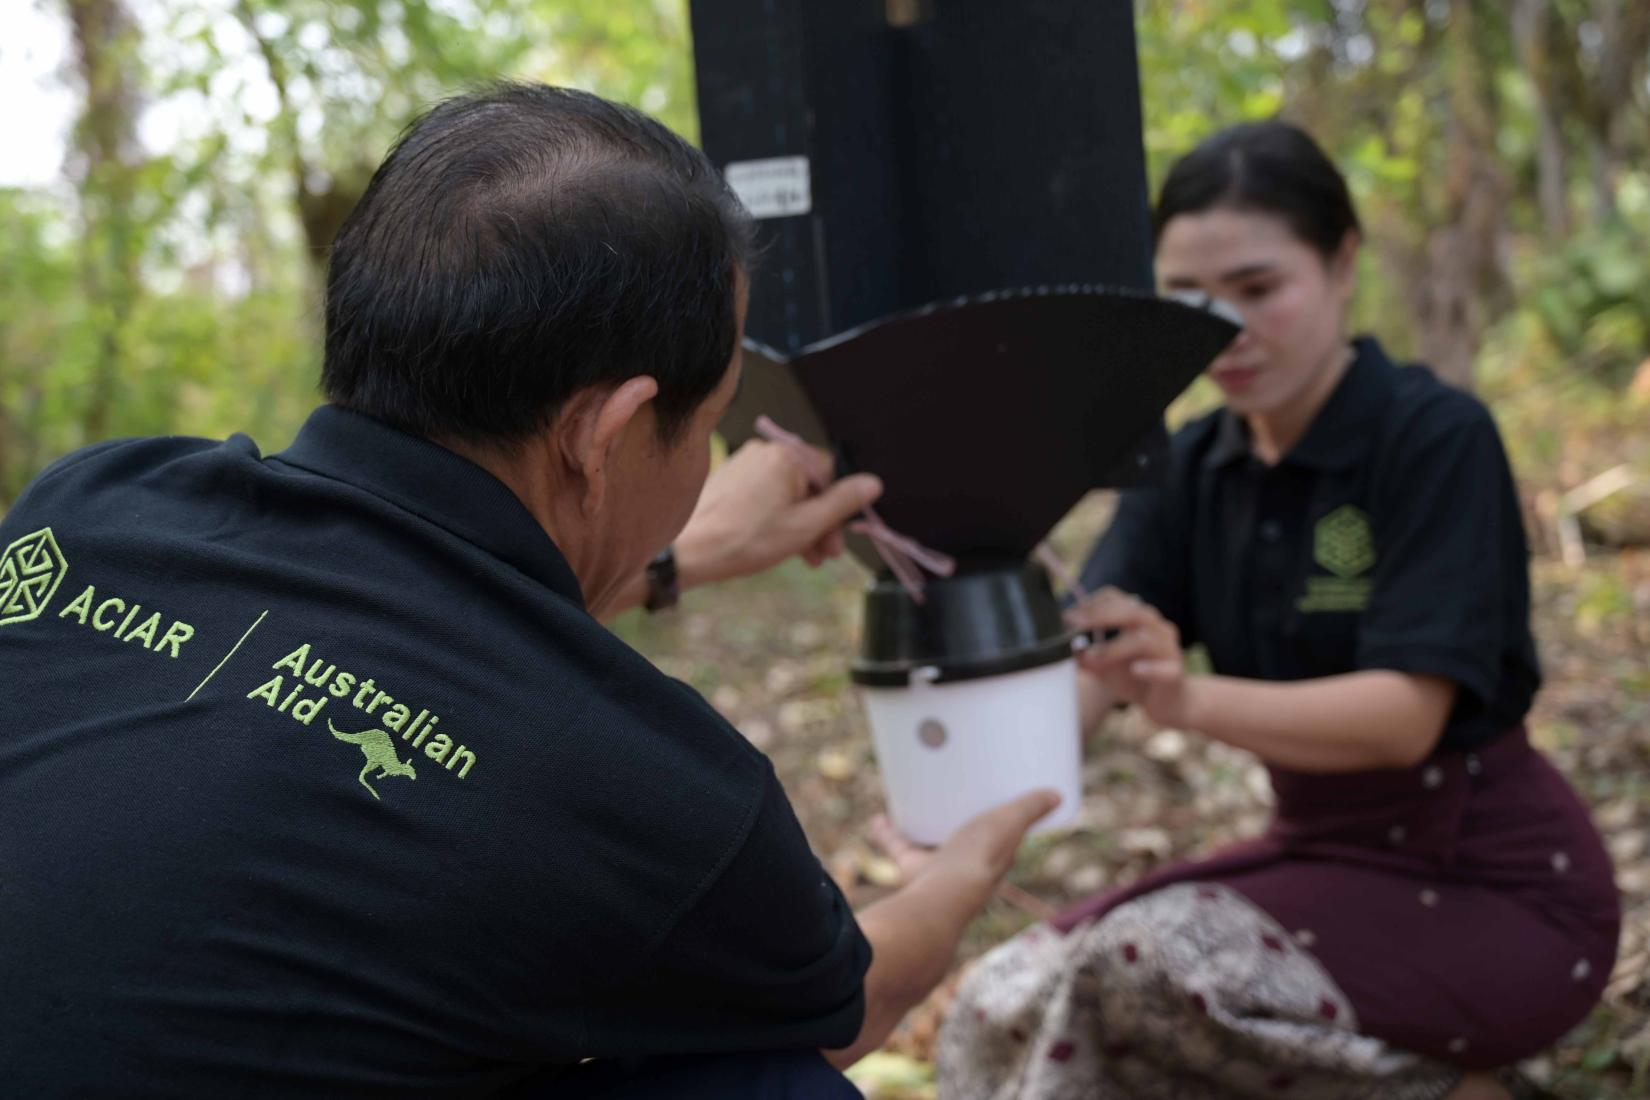 A research team in Laos conducts the same pest-trapping procedure as Cambodia in a forest near Vientiane, the capital city of Lao PDR.